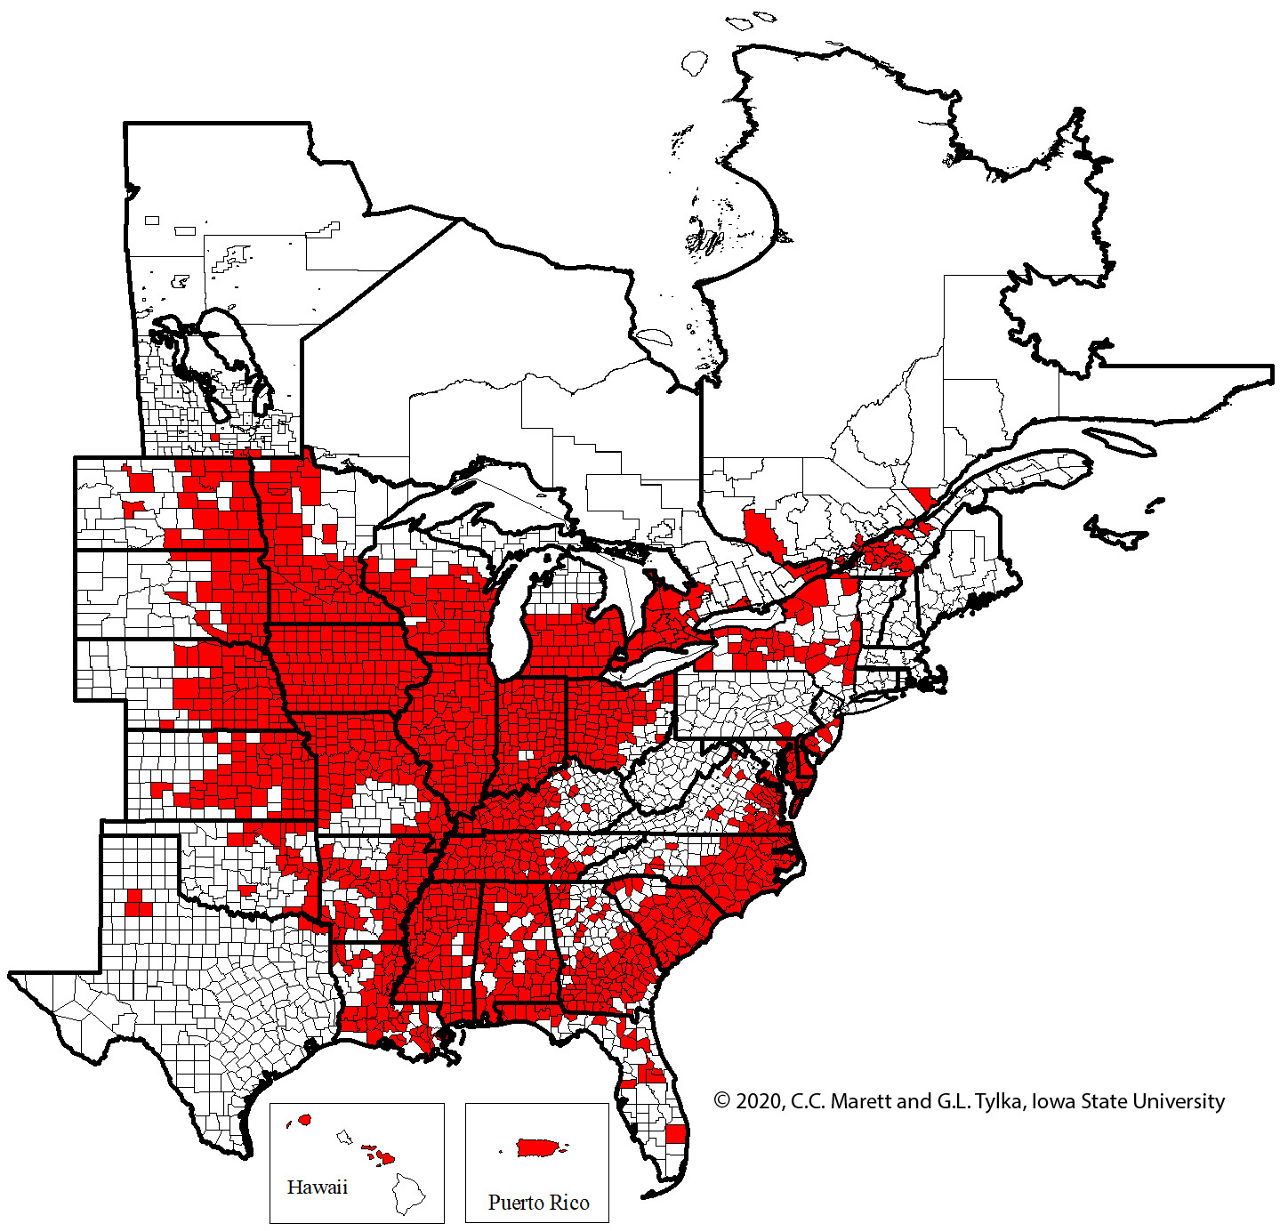 Distribution of soybean cyst nematode in the United States and Canada in 2020. 